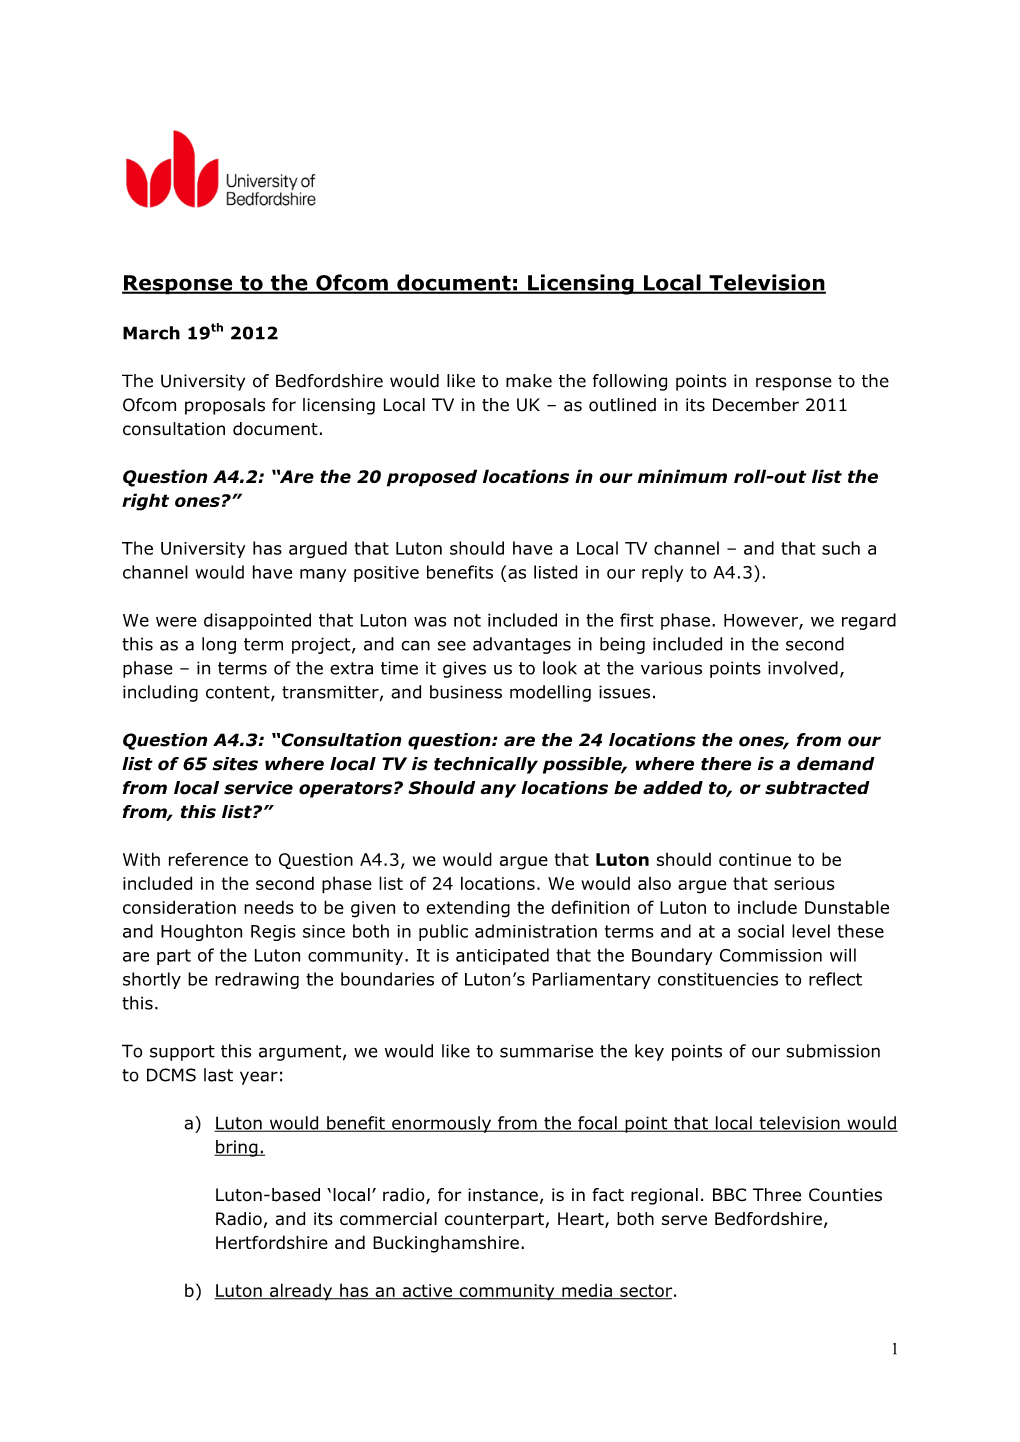 Response to the Ofcom Document: Licensing Local Television